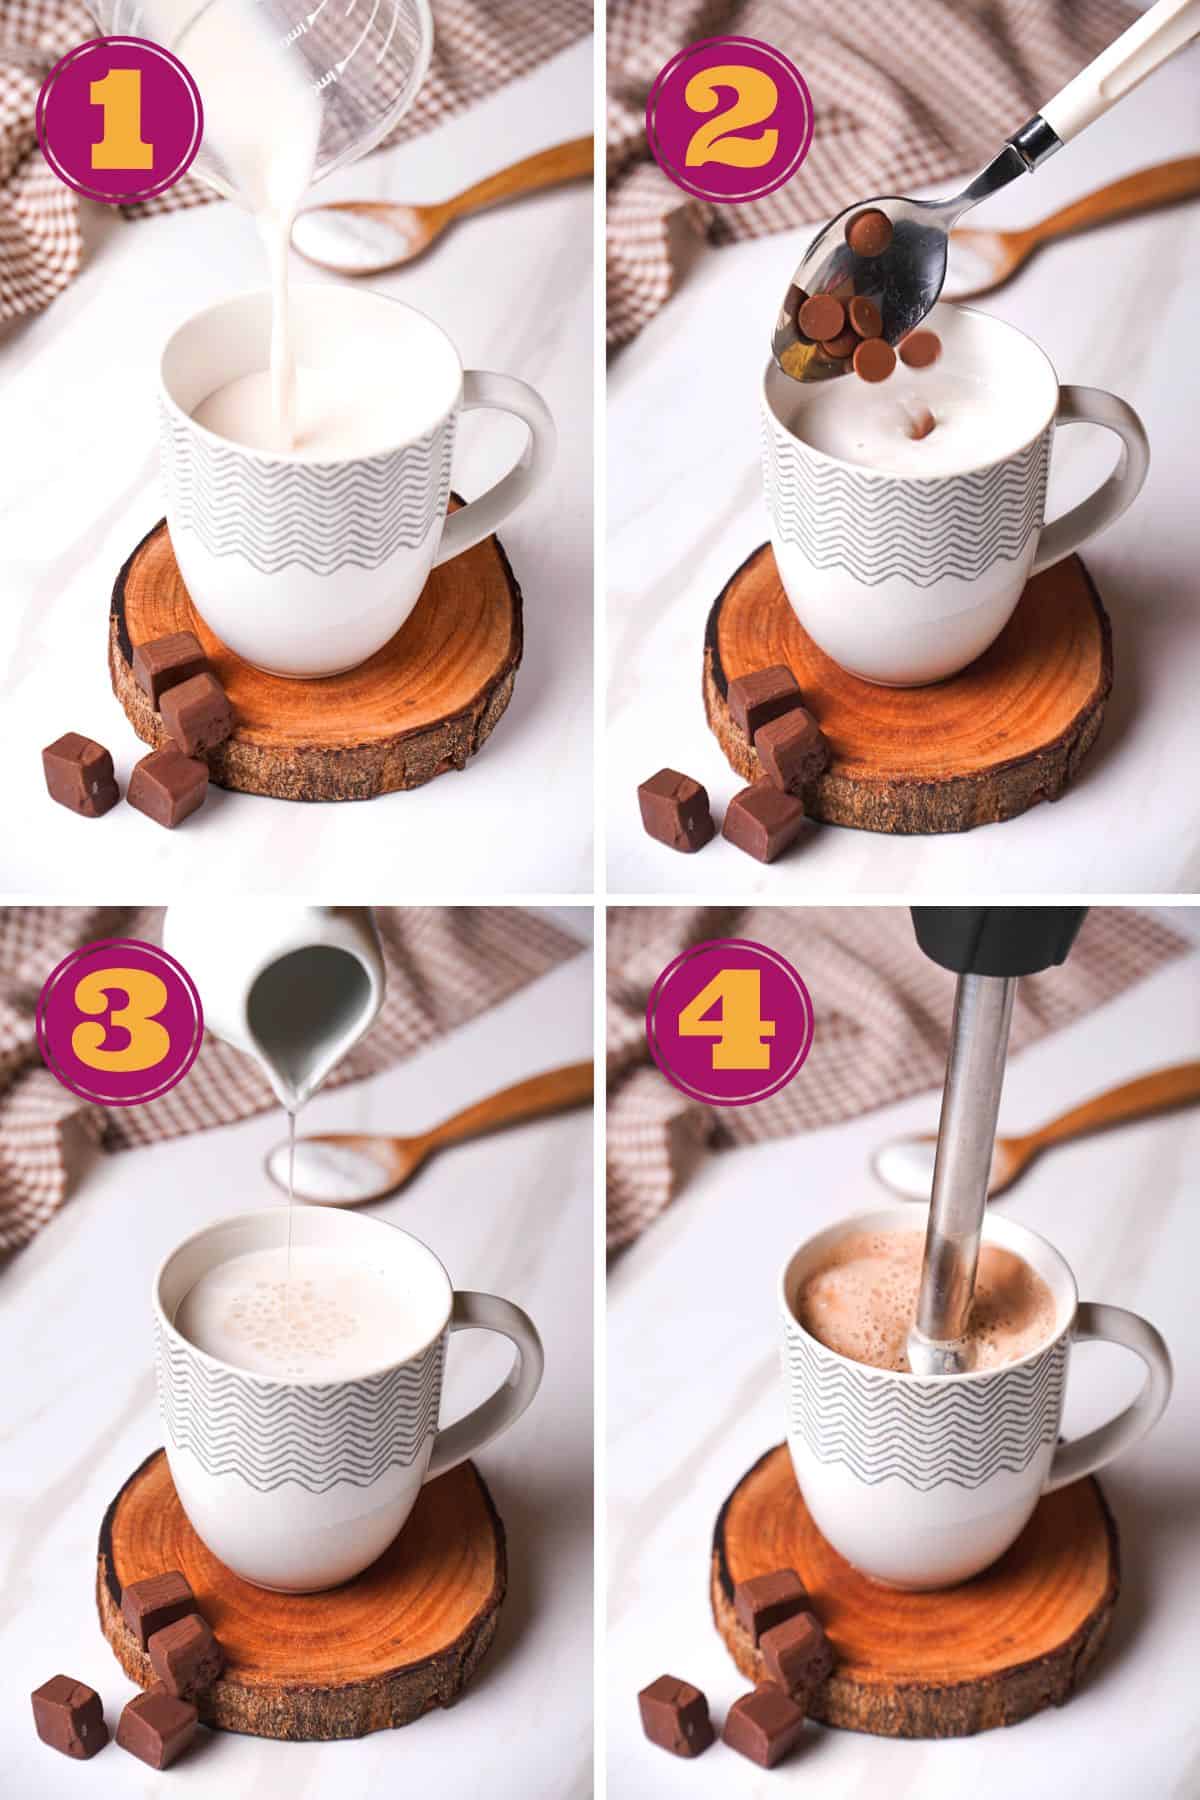 step-by-step instructions for how to make Sugar-free keto Hot Chocolate